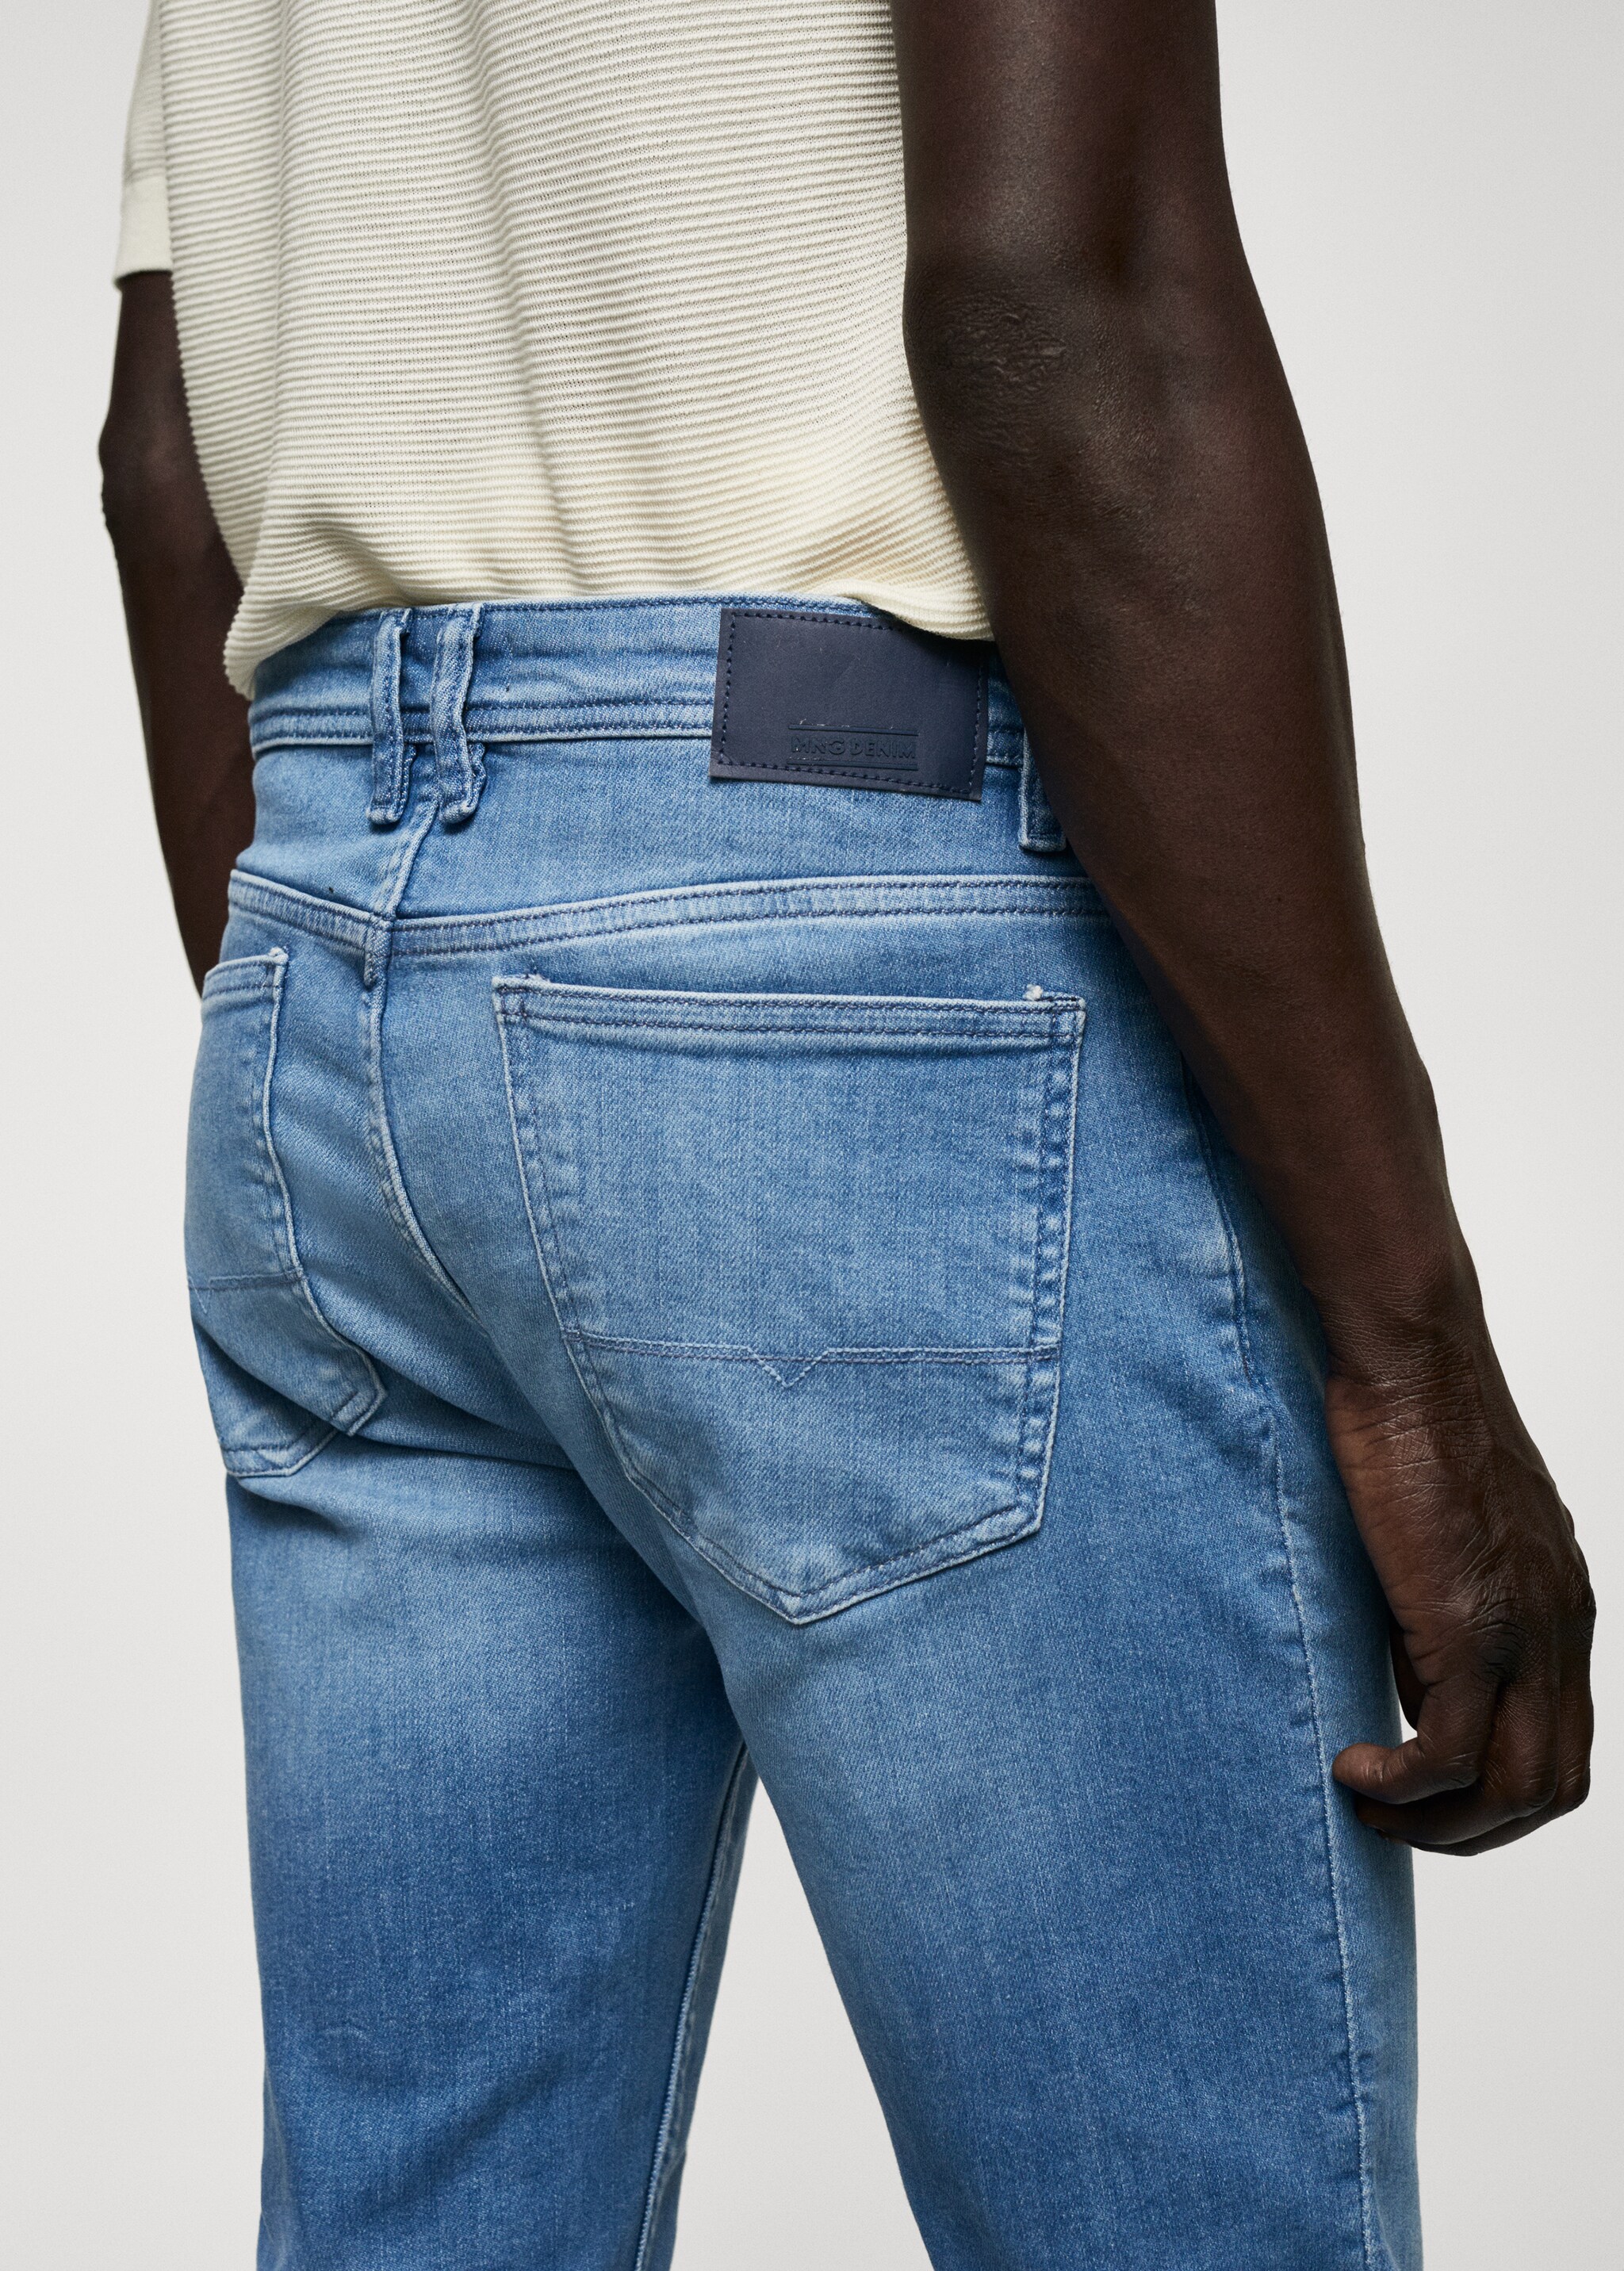 Premium skinny jeans - Details of the article 6